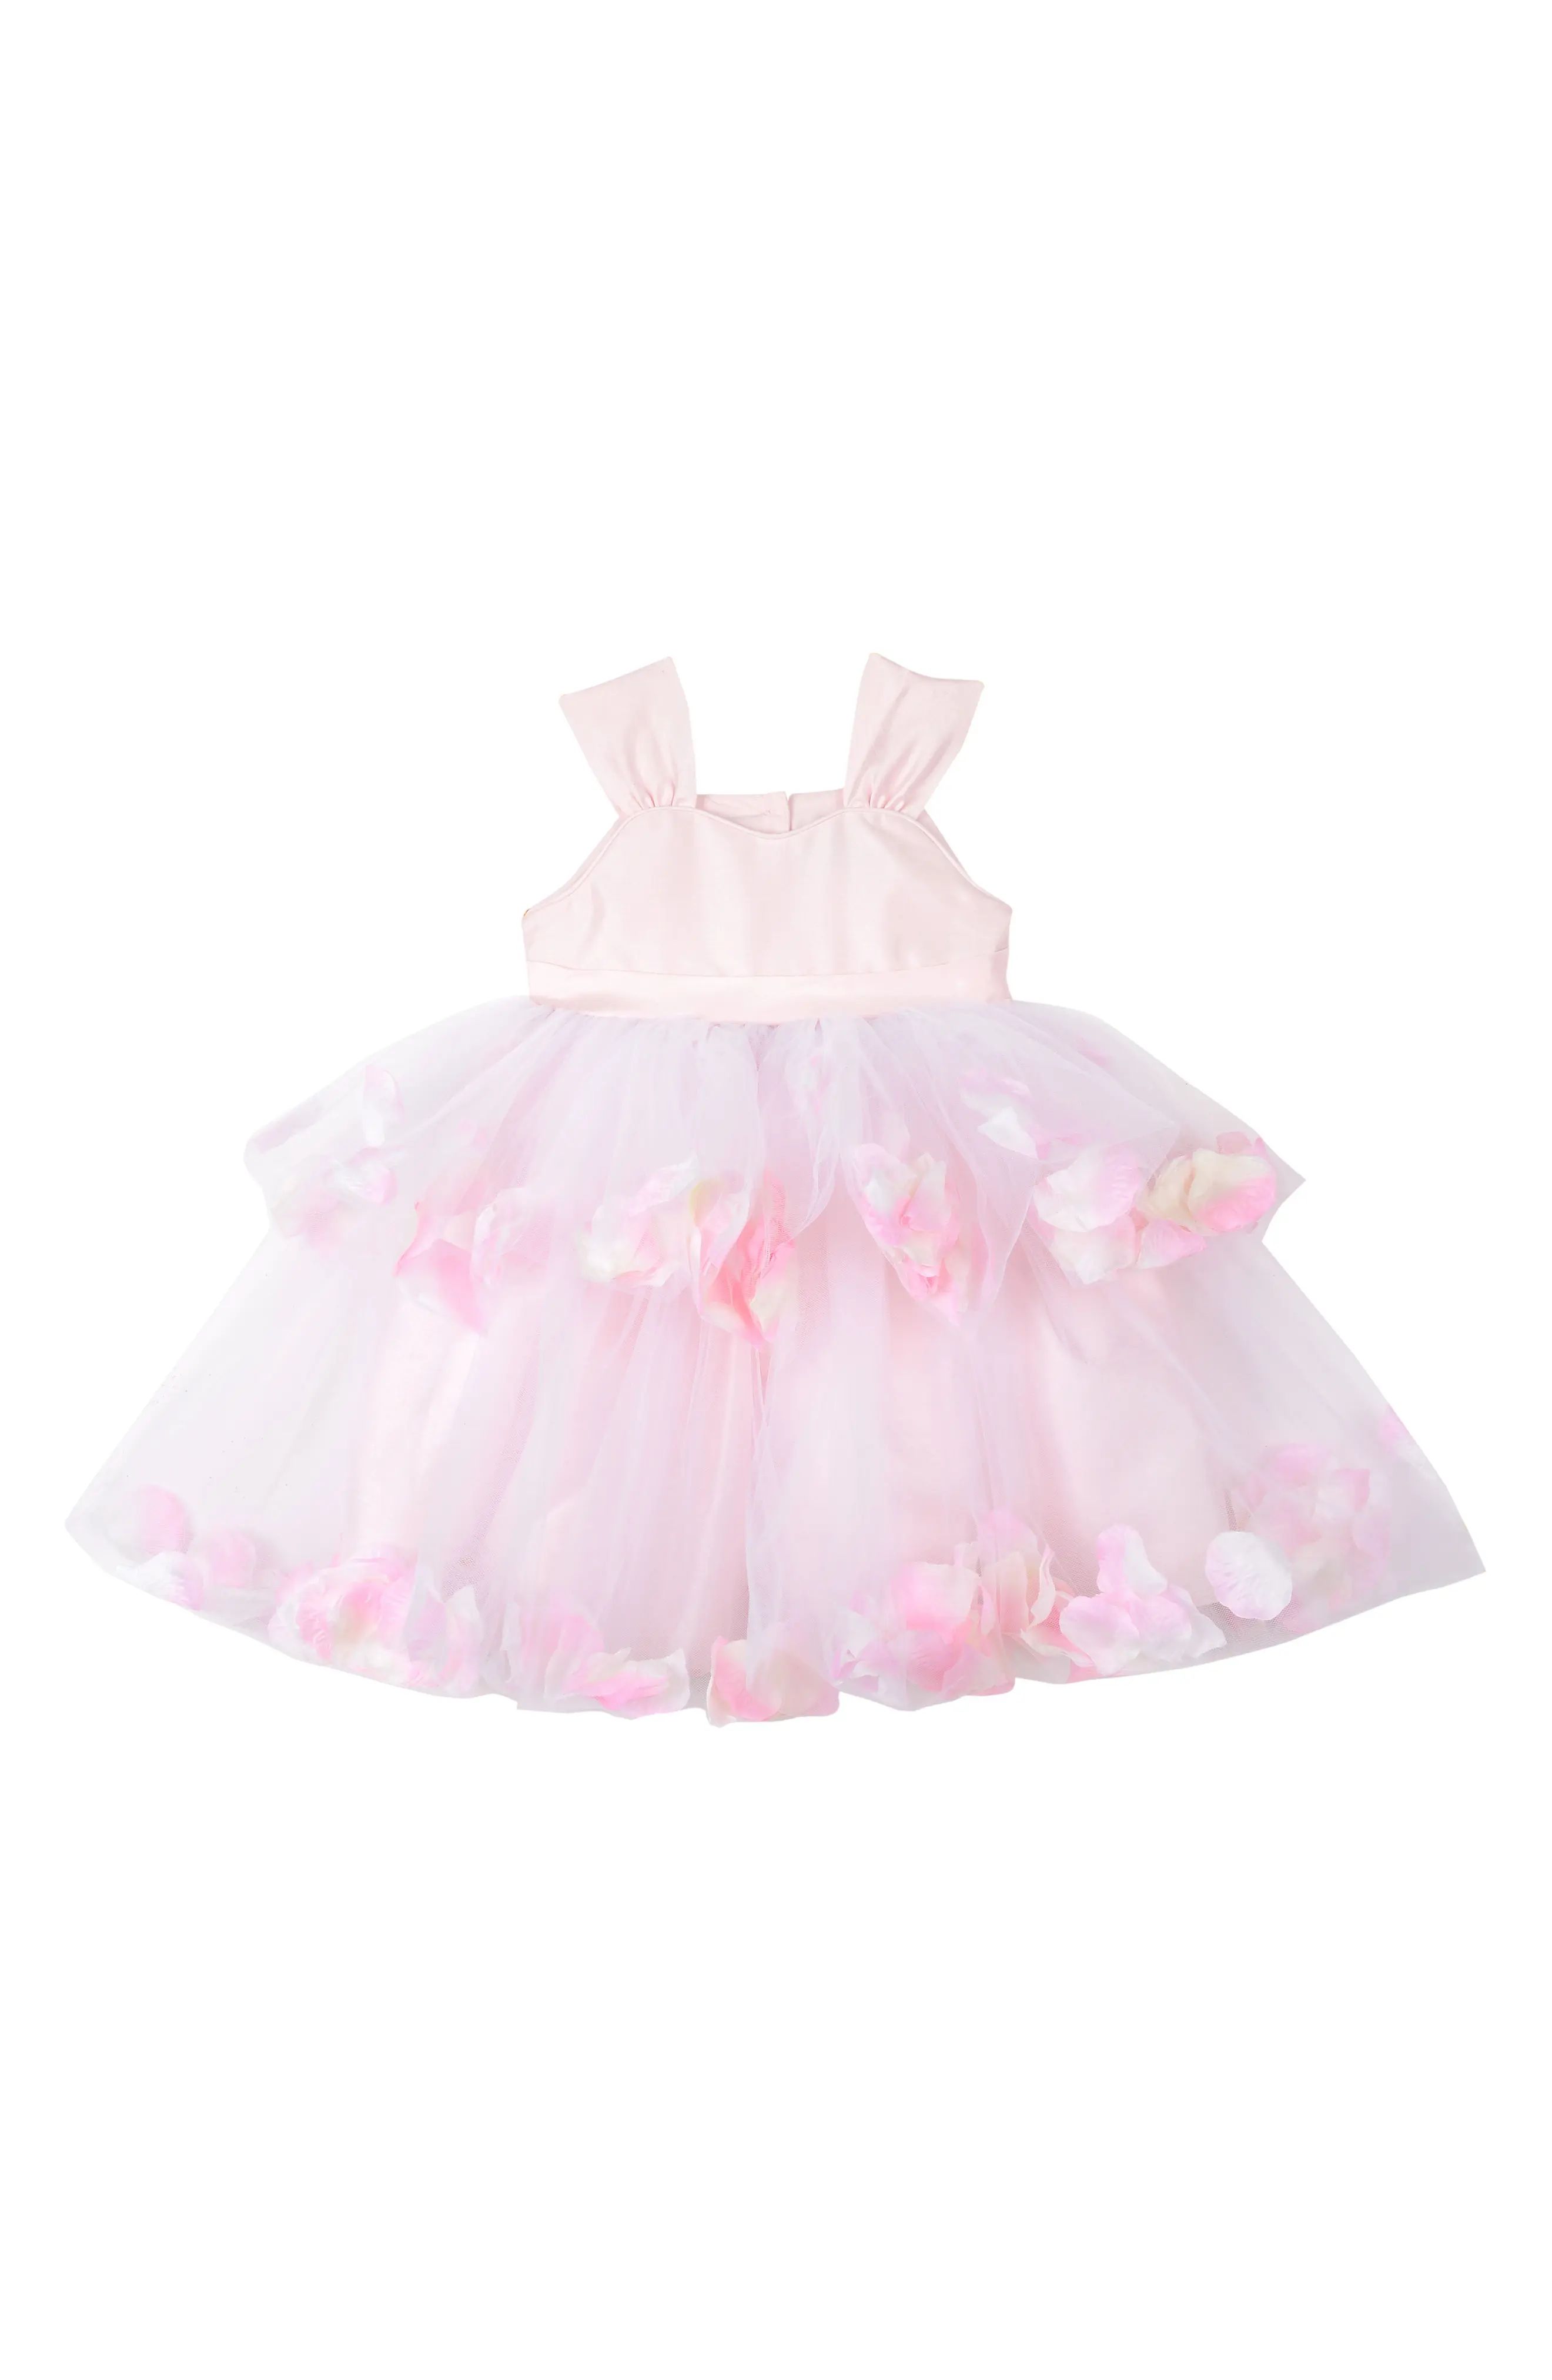 Girl's Pippa & Julie Tiered Petal & Tulle Party Dress, Size 6 - Pink | Nordstrom